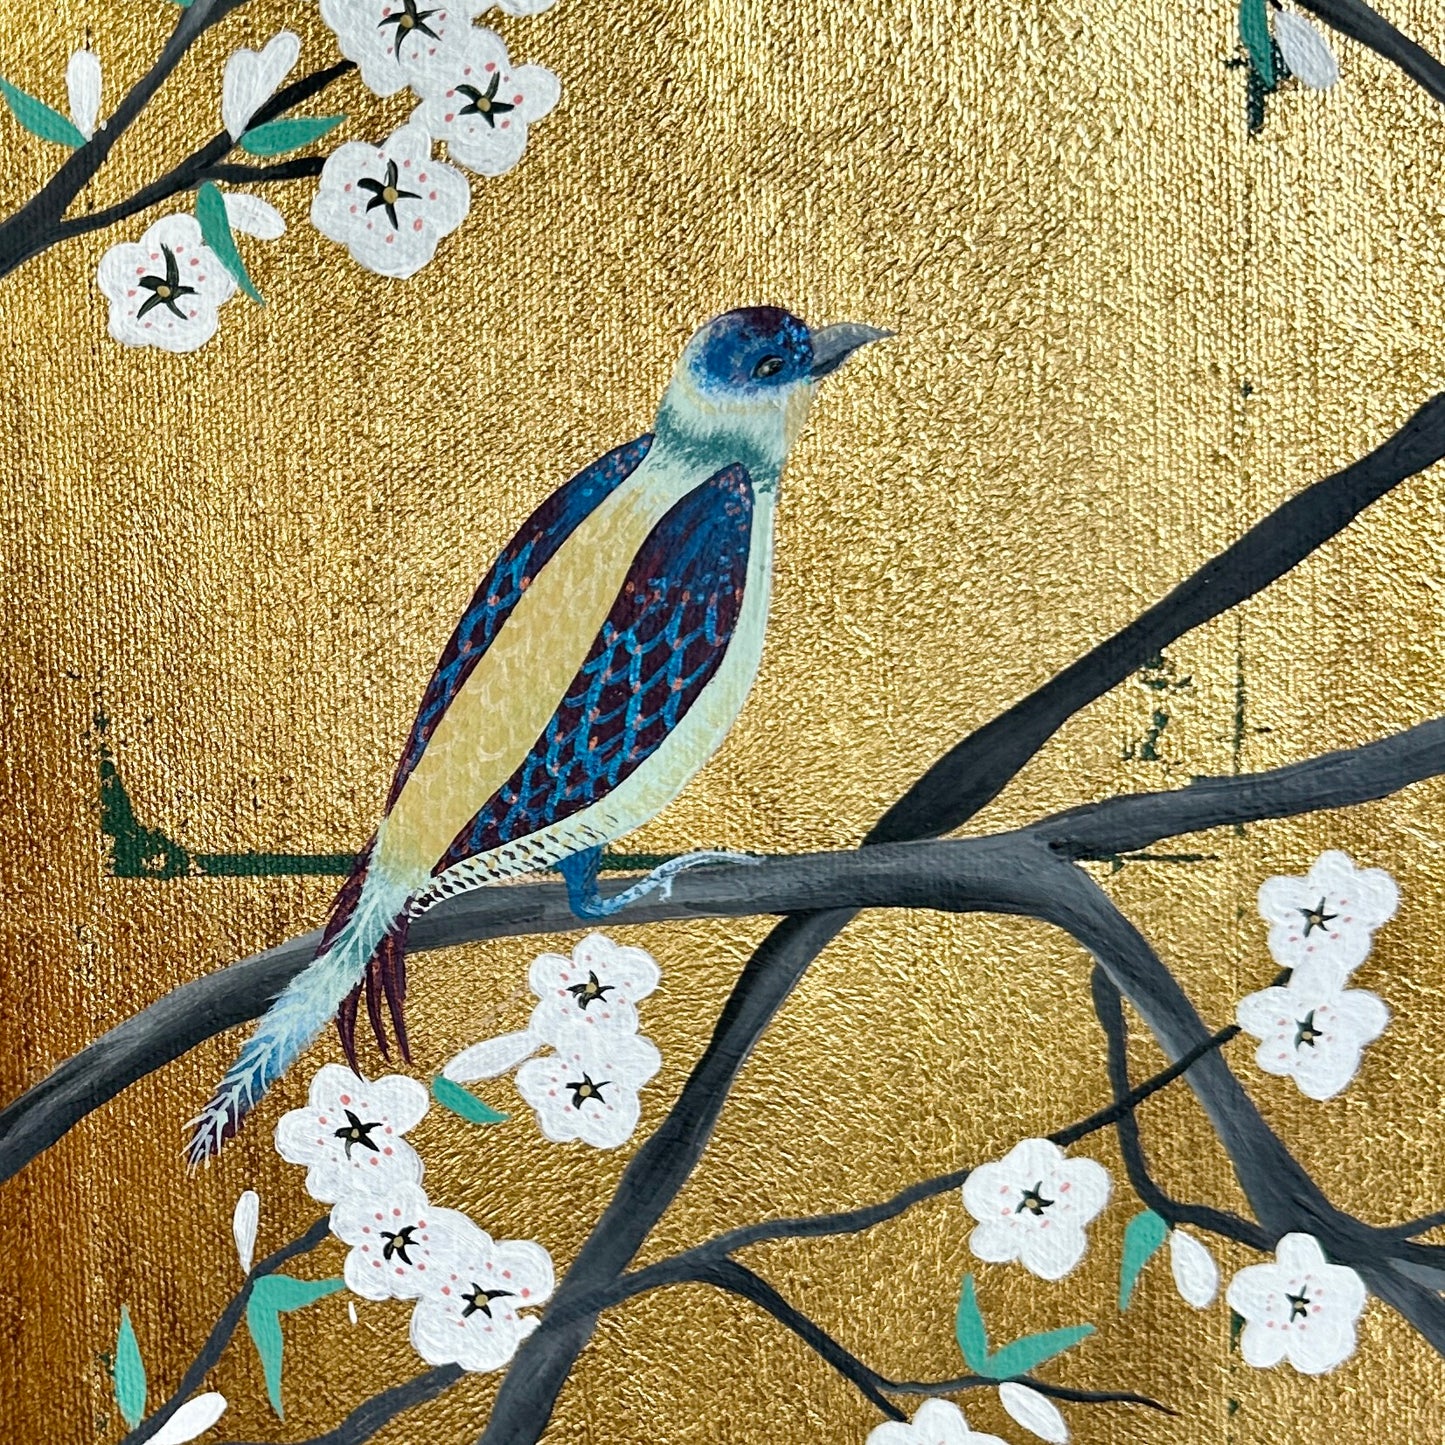 Glowing Springtime - goldleaf and acrylic on canvas